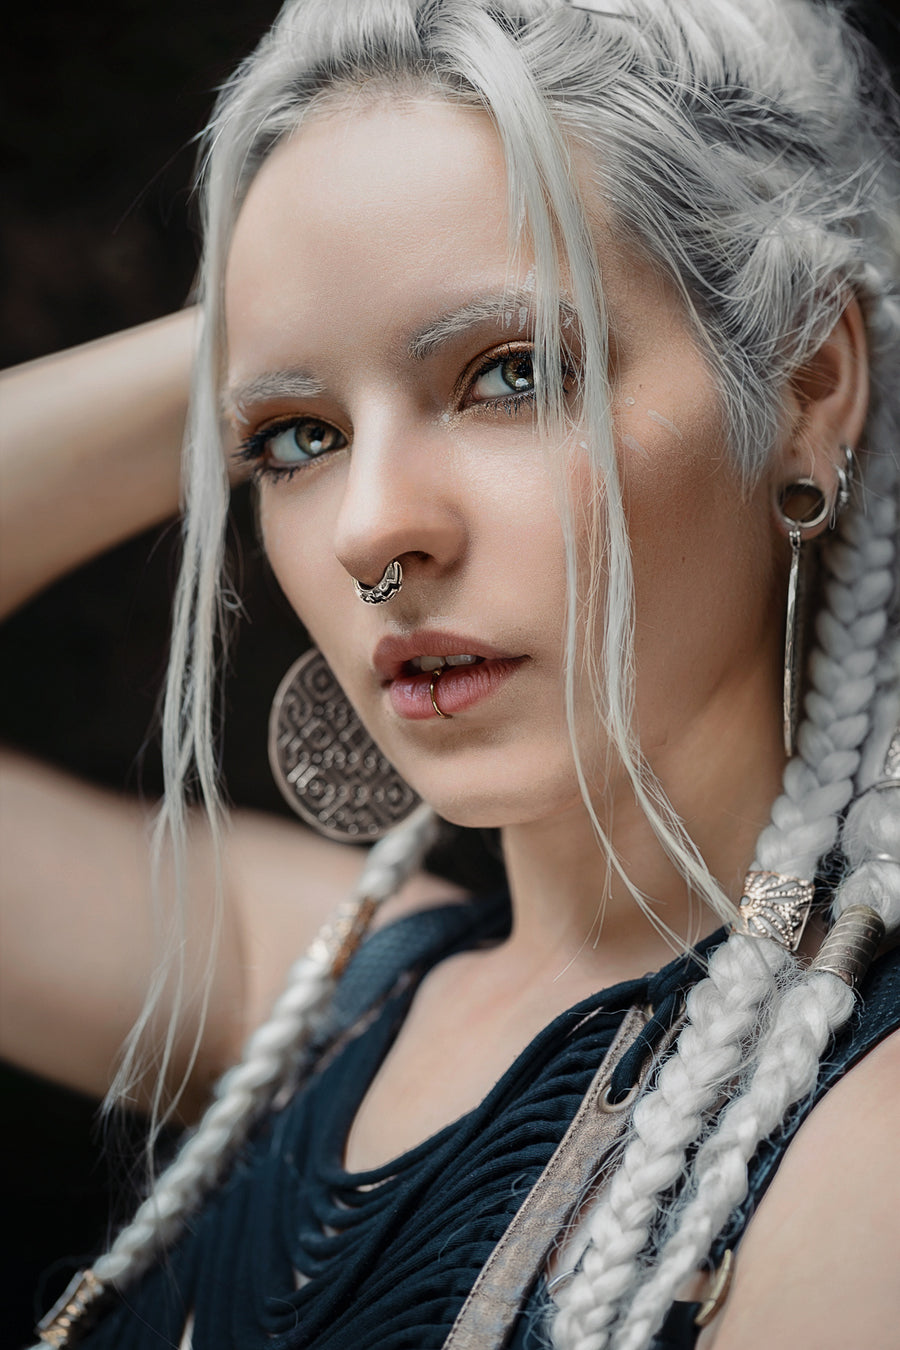 Close-up of a sophisticated 925 sterling silver Shipibo septum piercing on a serene woman with silver hair and a peaceful expression.